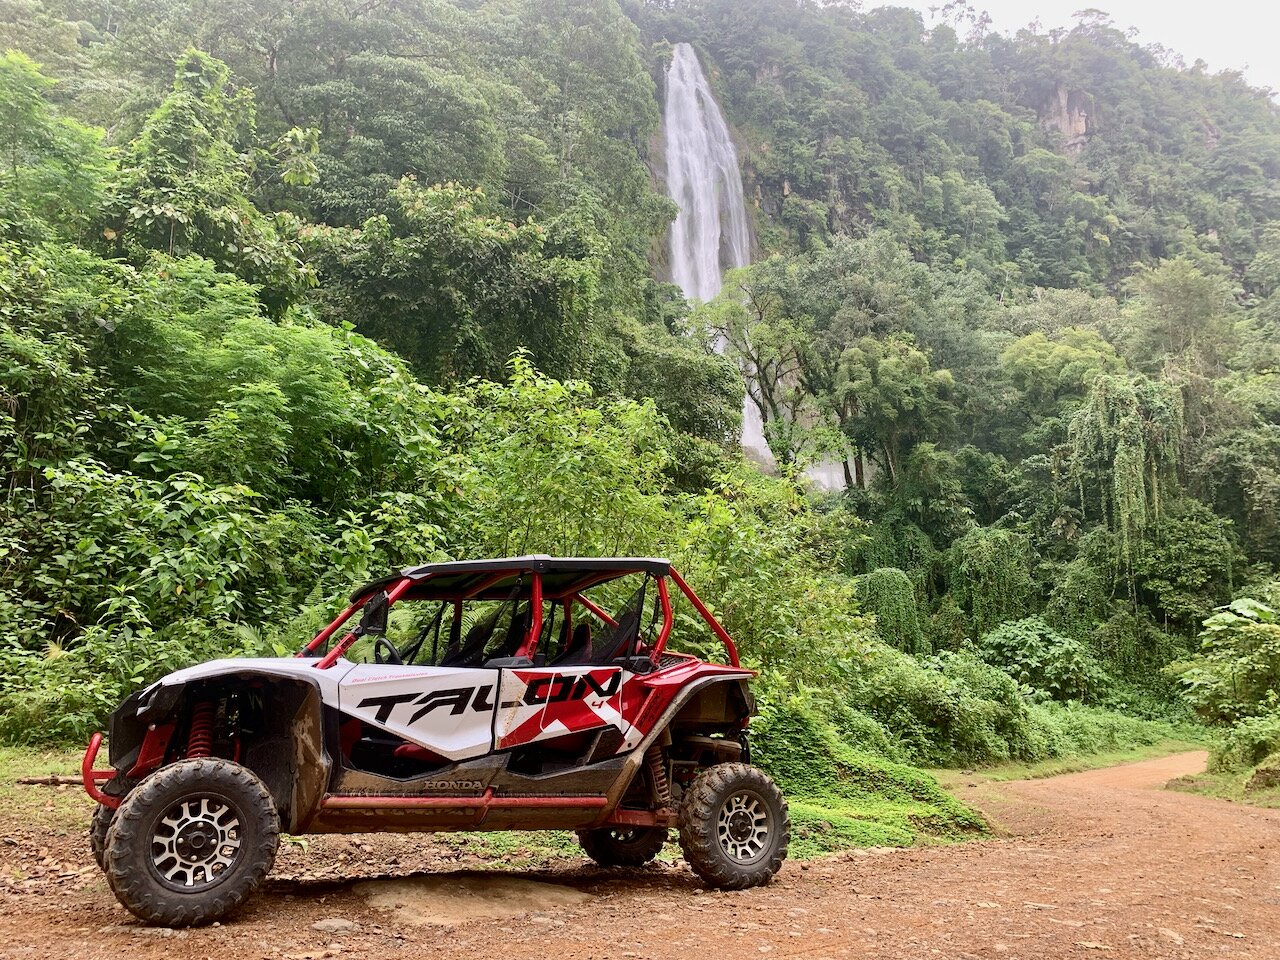 Jungle ATV Quad Tours - All You Need to Know BEFORE You Go (with